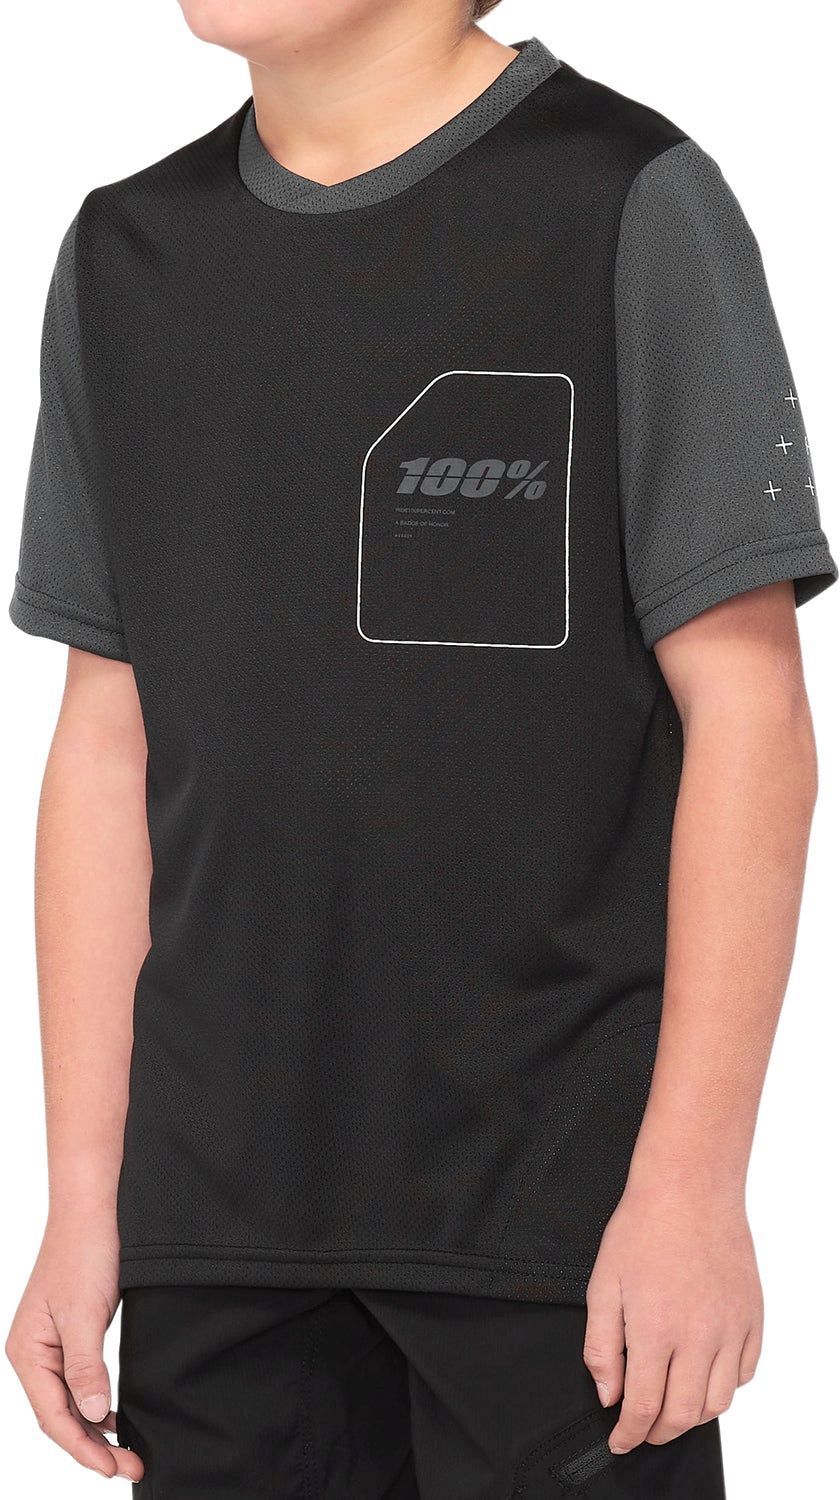 100% Ridecamp Youth Short Sleeve Jersey Black/Charcoal 152-163